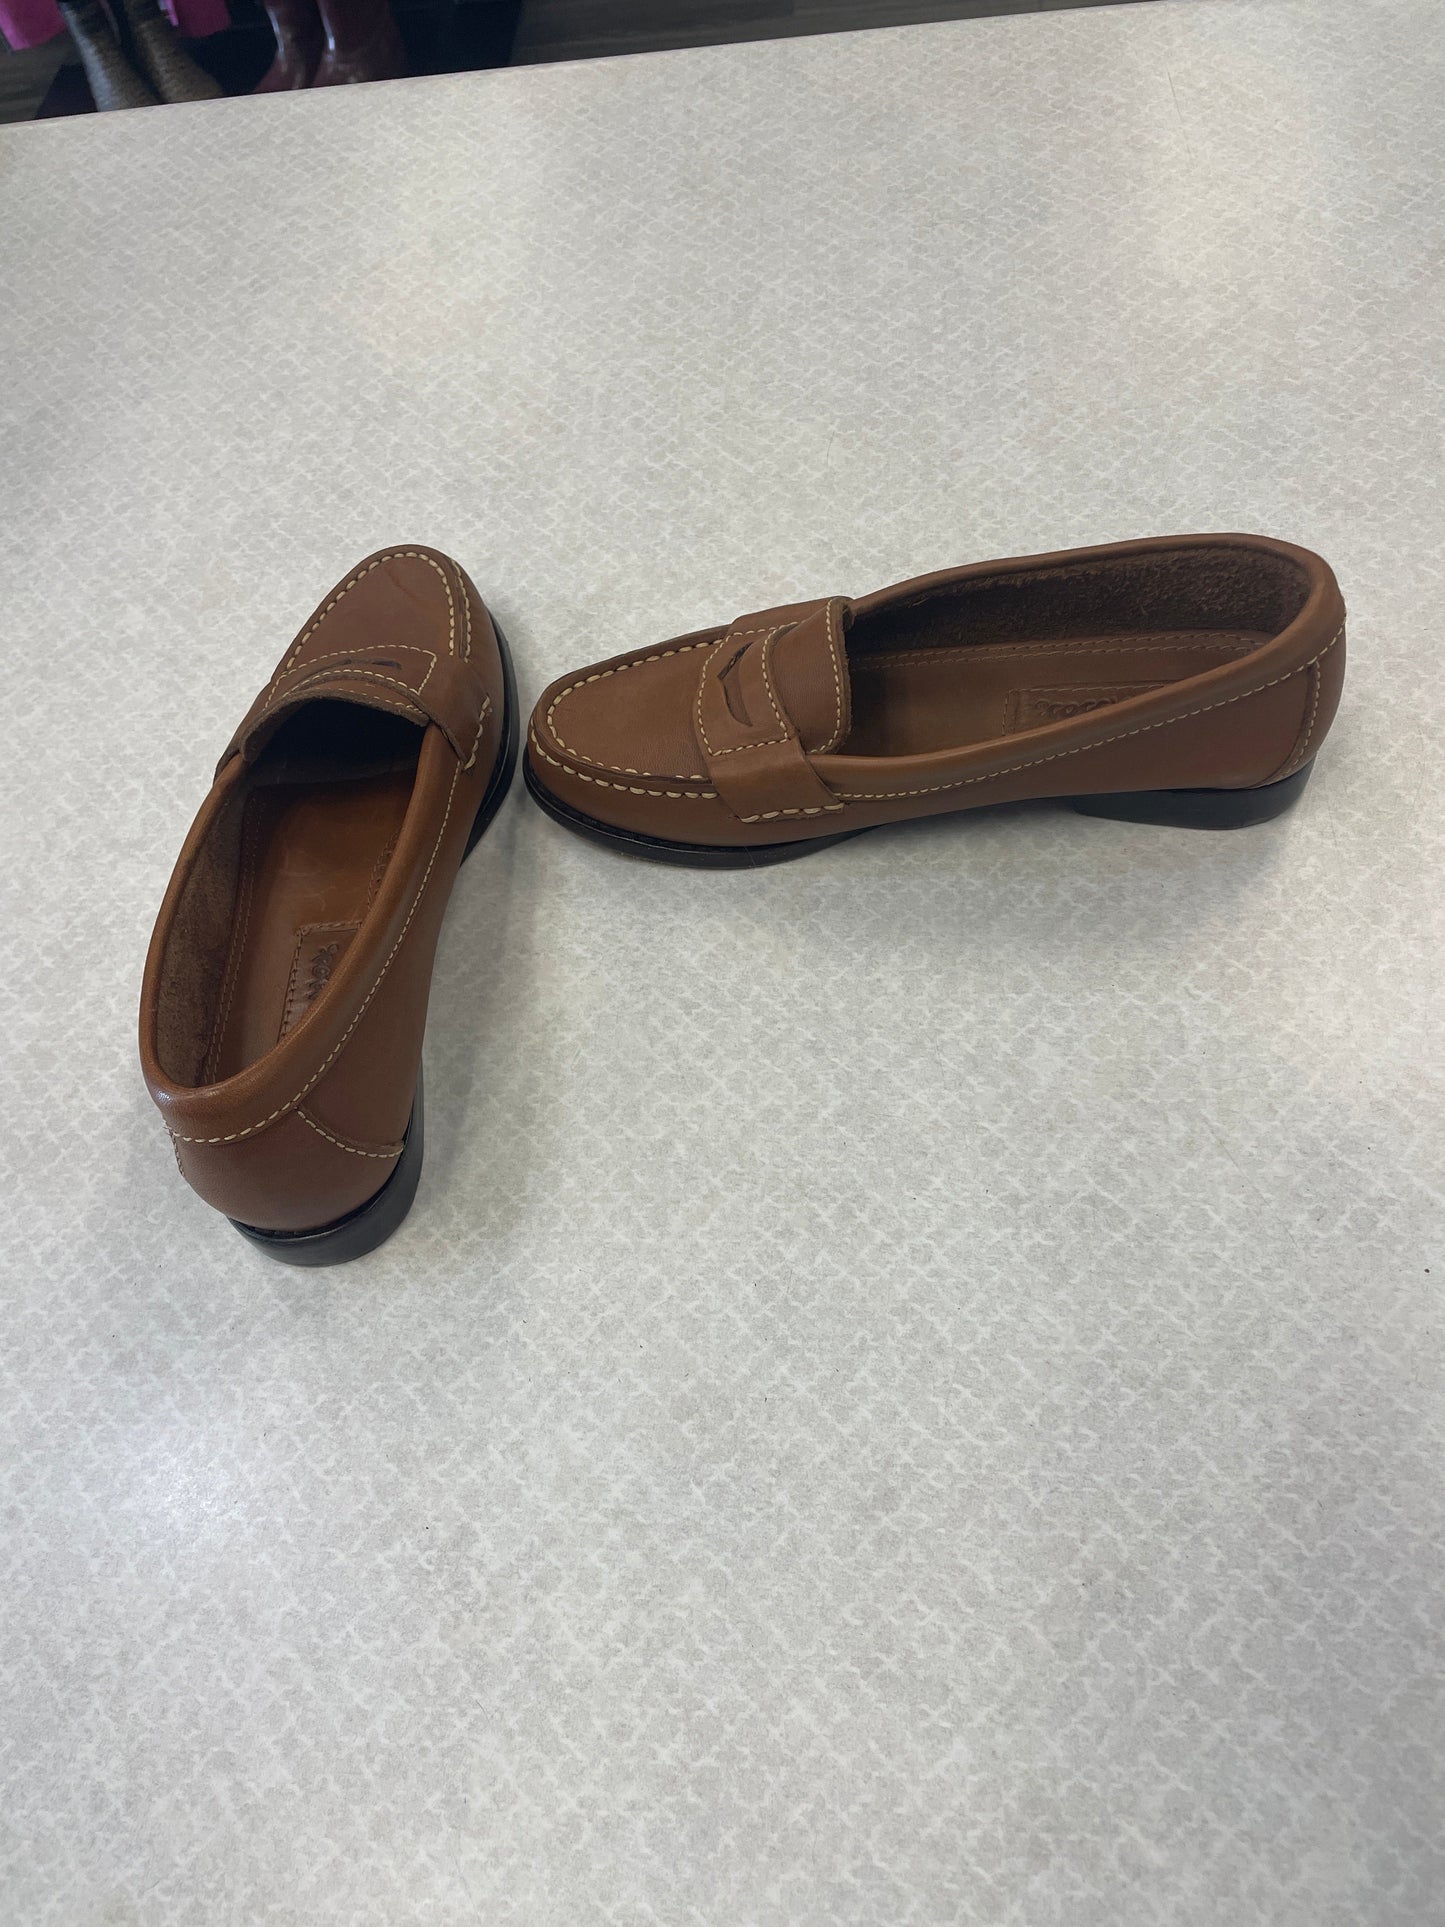 Brown Shoes Flats Clothes Mentor, Size 6